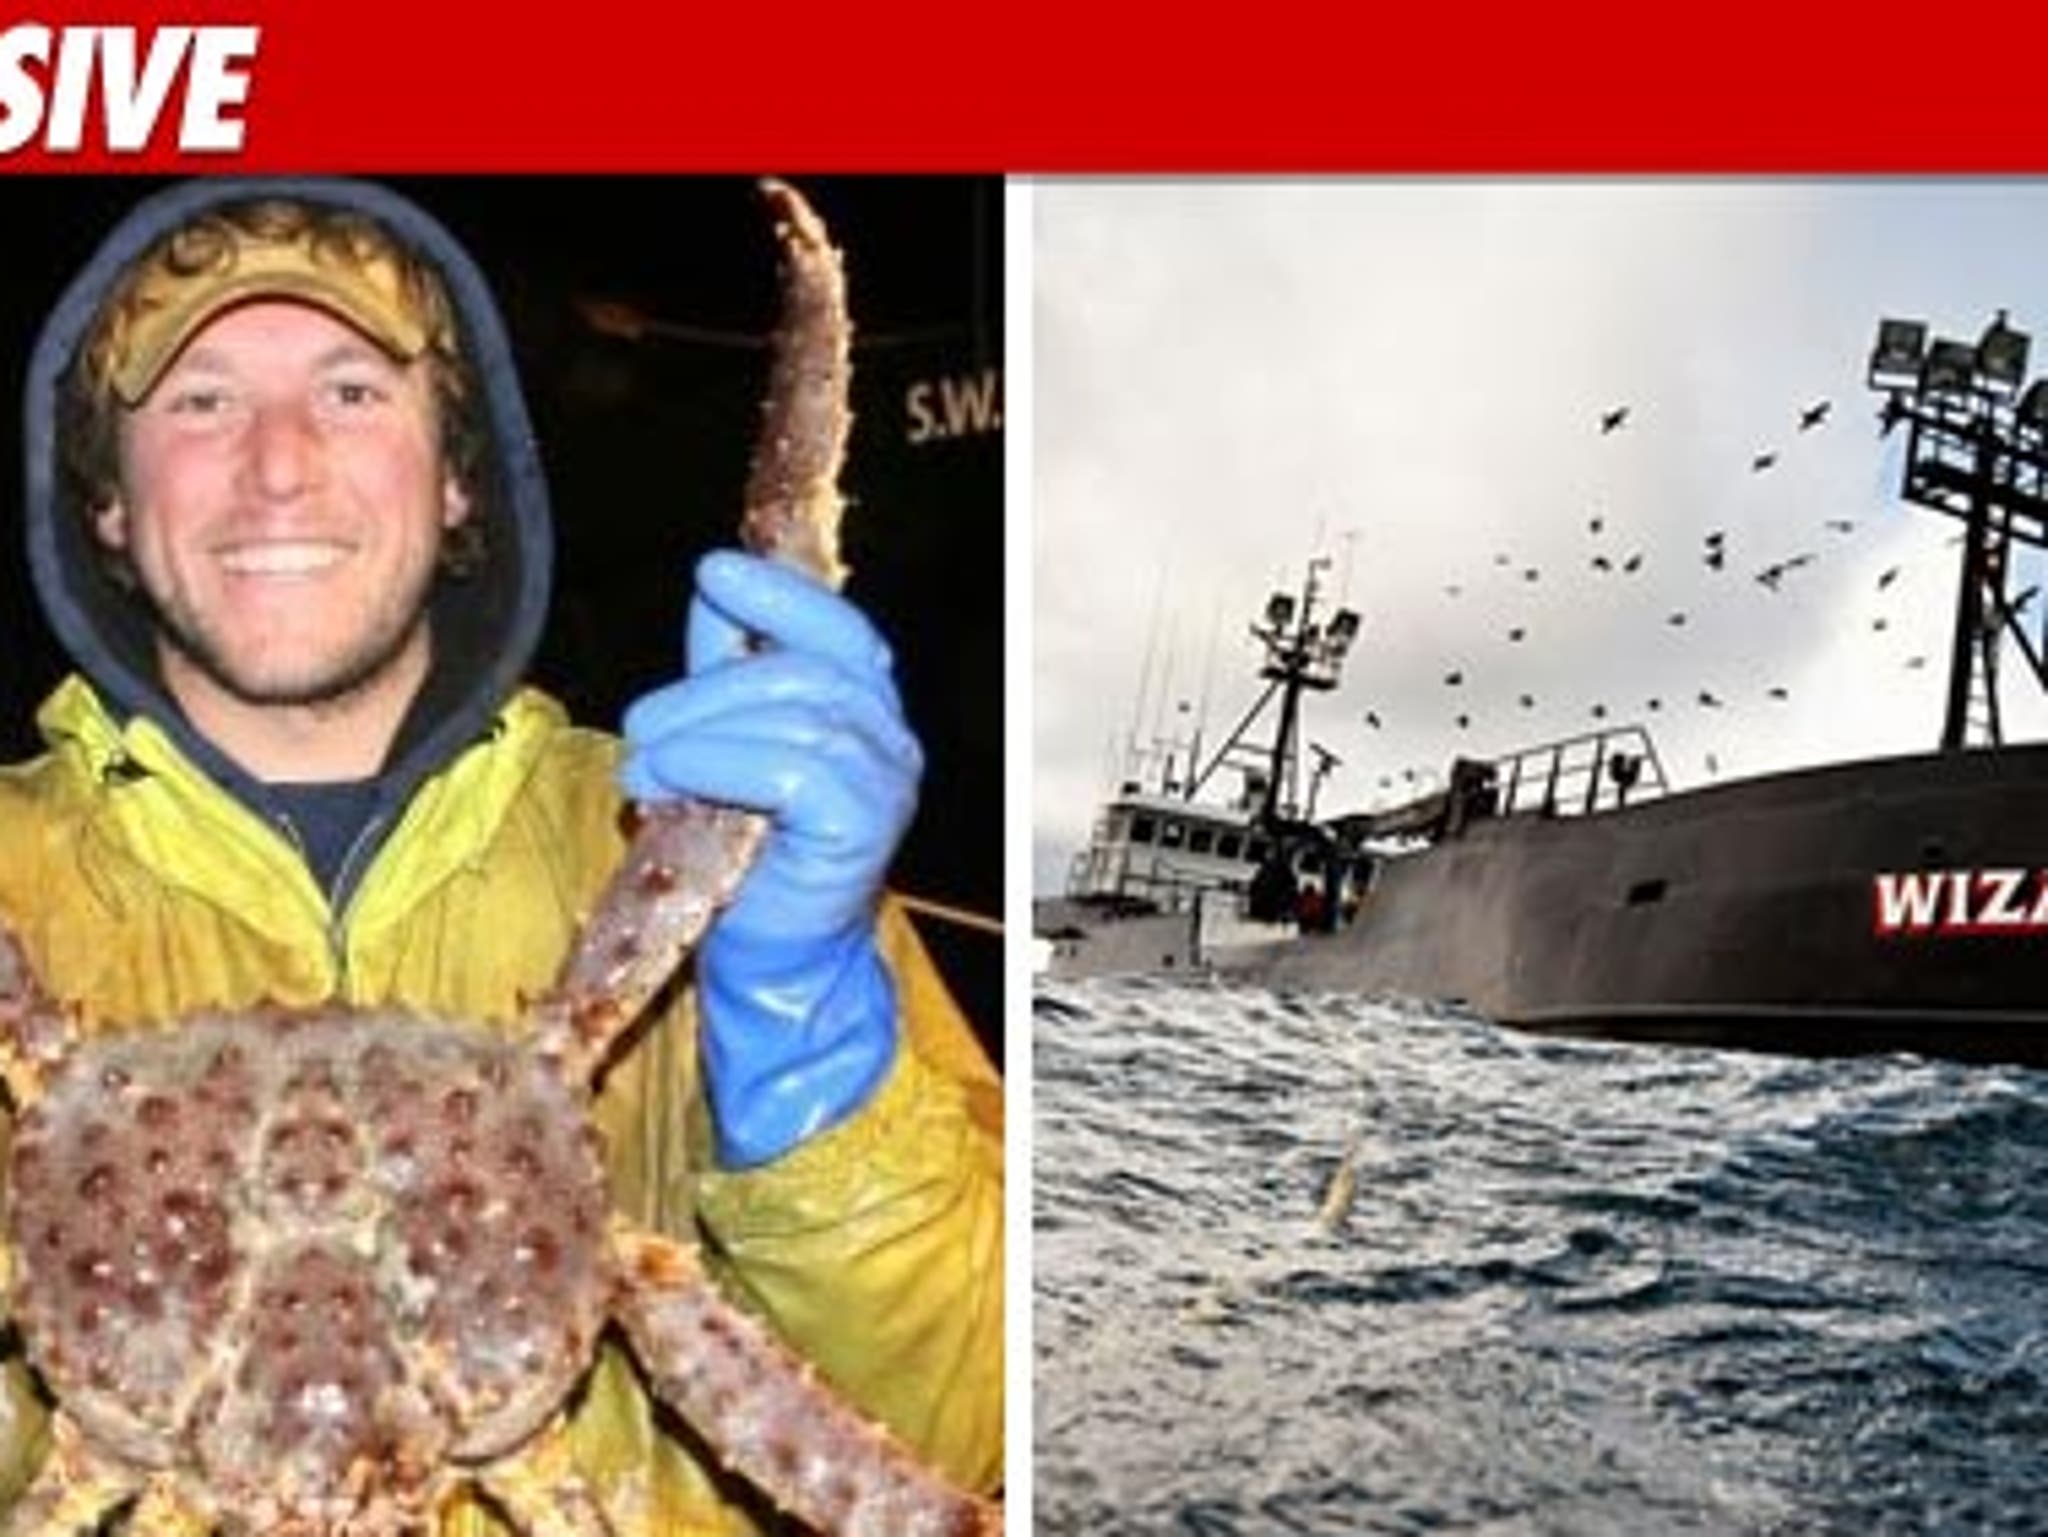 The Wizard From Deadliest Catch Reaches A Staggering Weight When